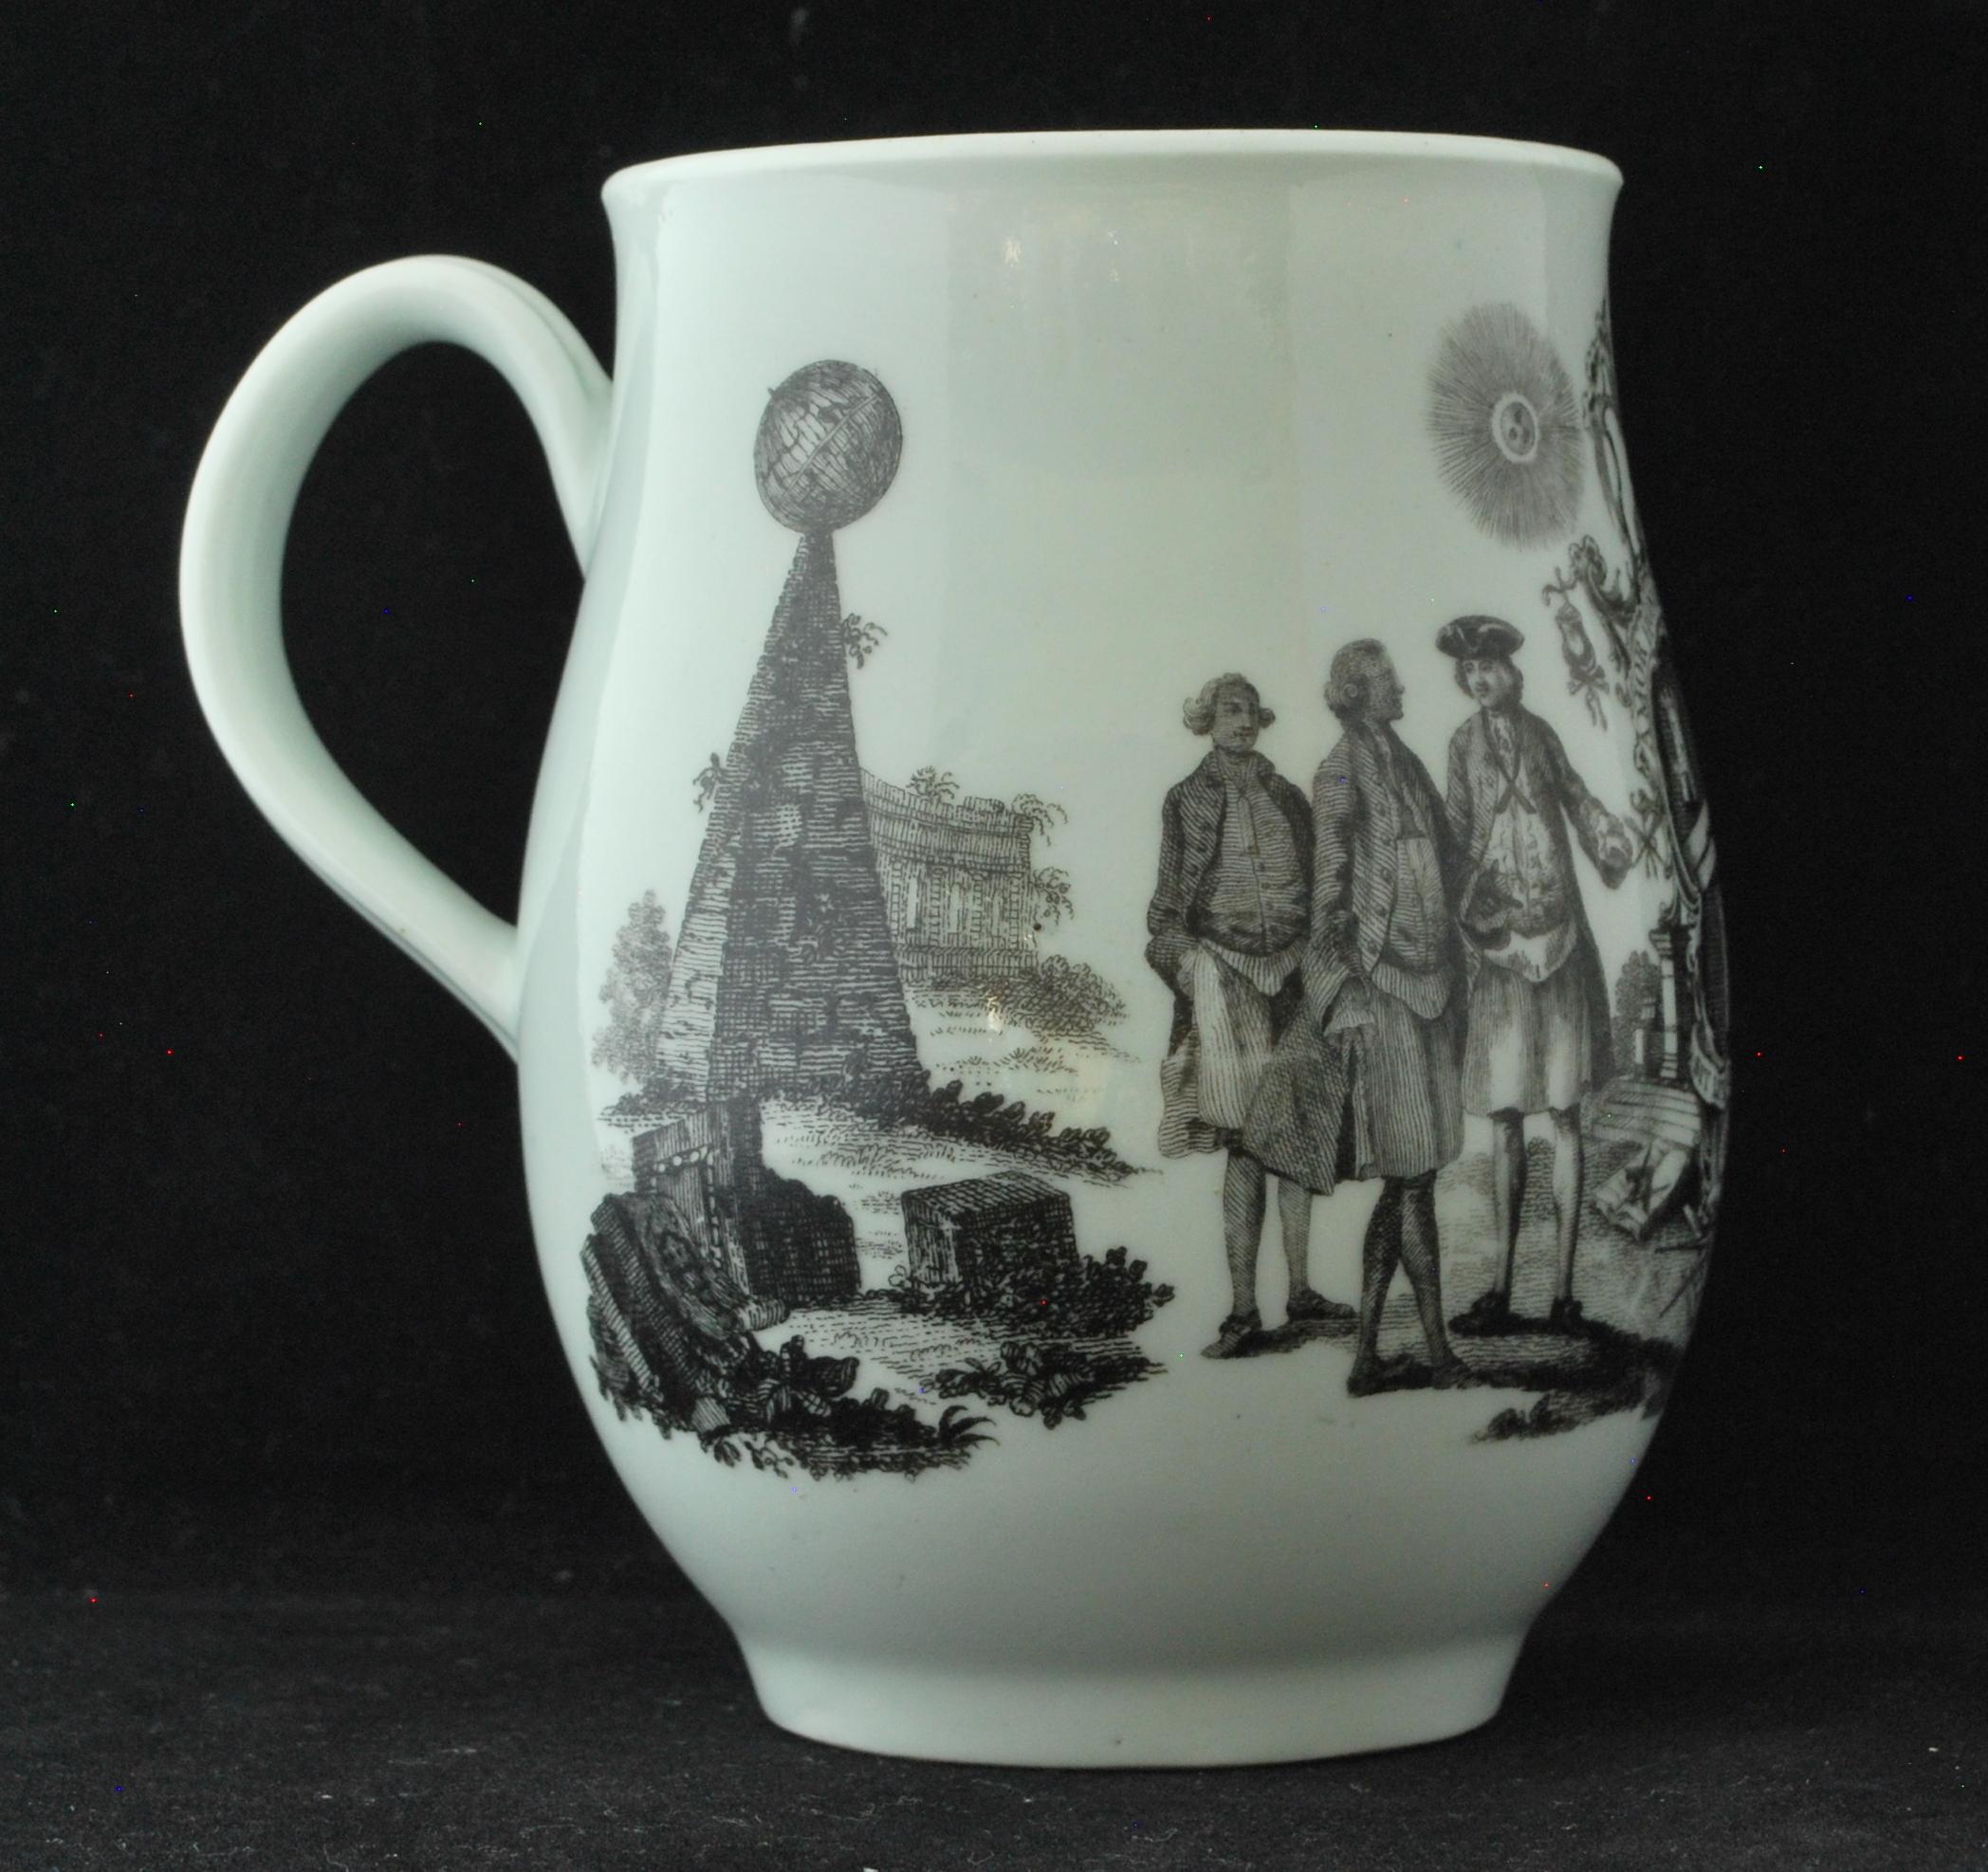 A lovely baluster-shaped mug, decorated with Masonic transfer prints. The shape delightful, the decoration full of interest.